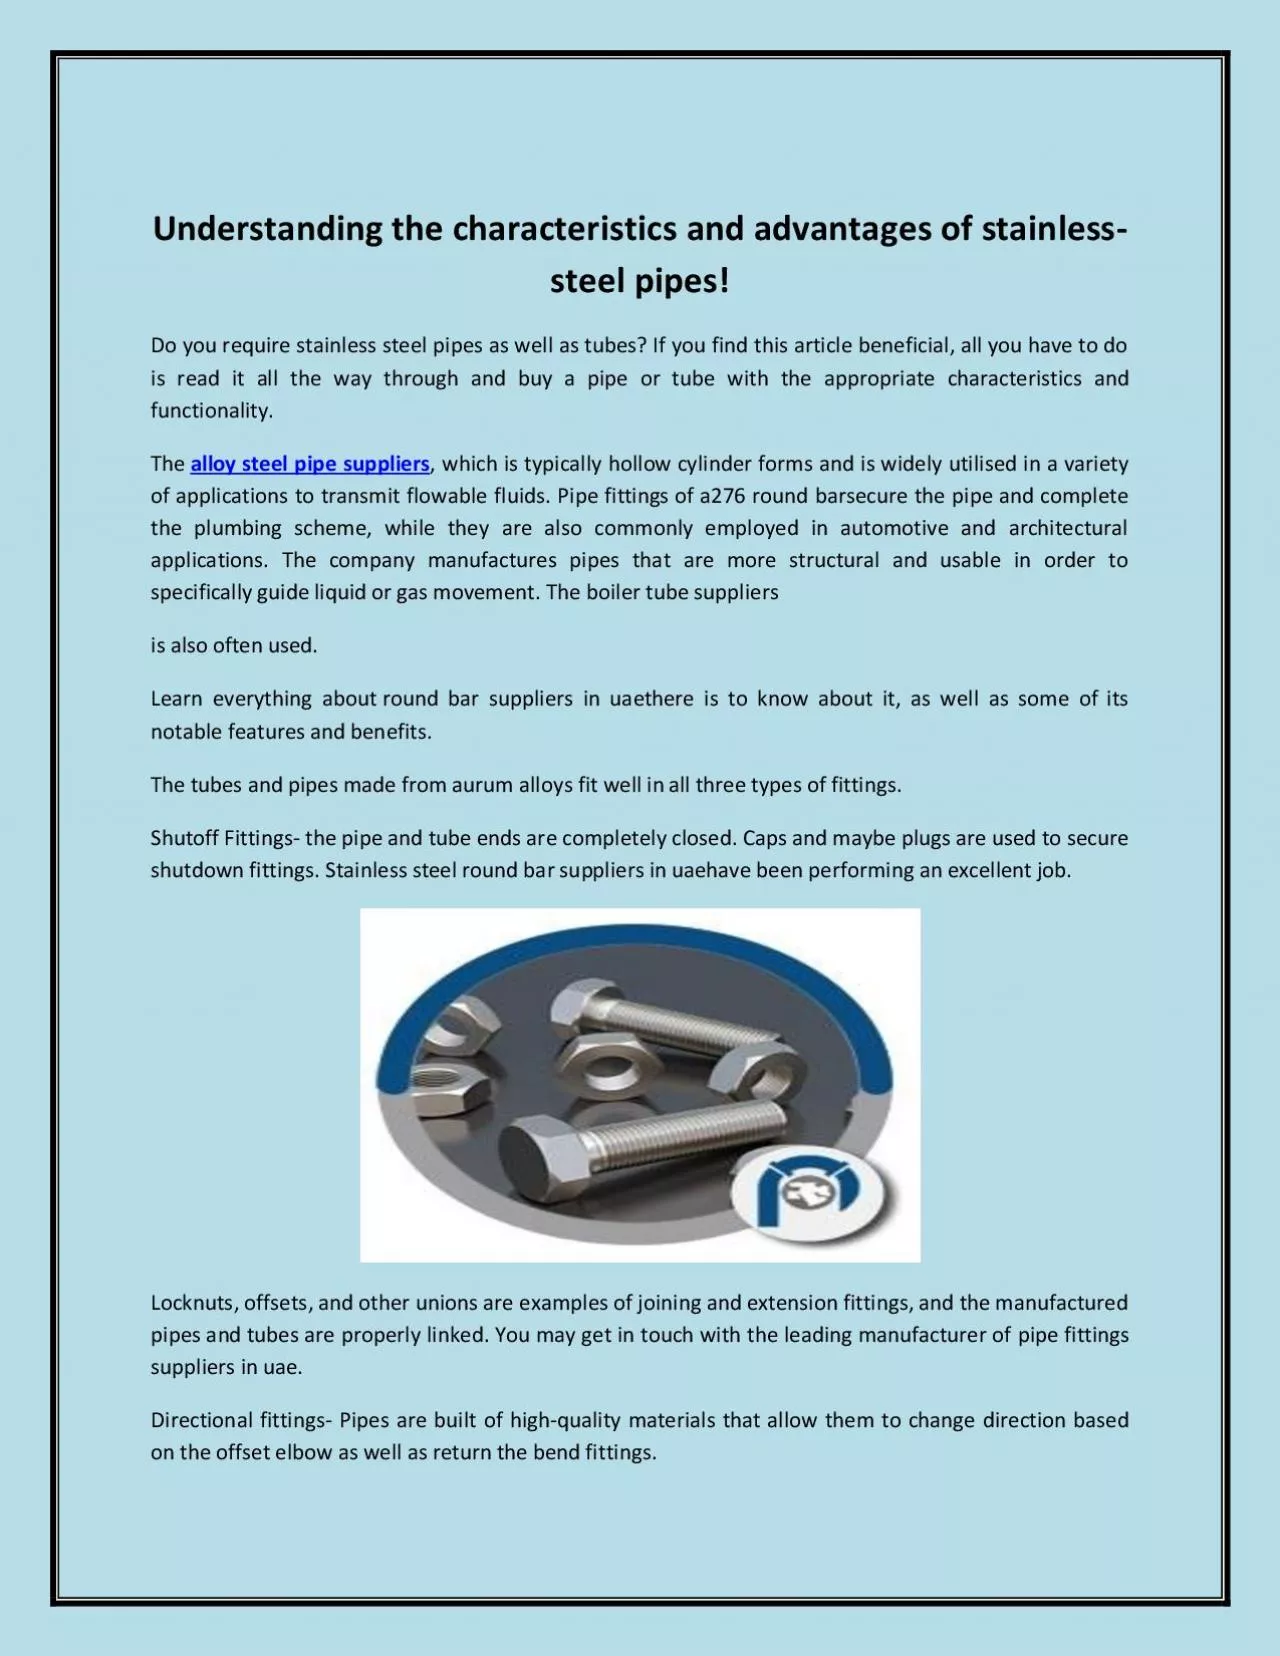 Understanding the characteristics and advantages of stainless-steel pipes!